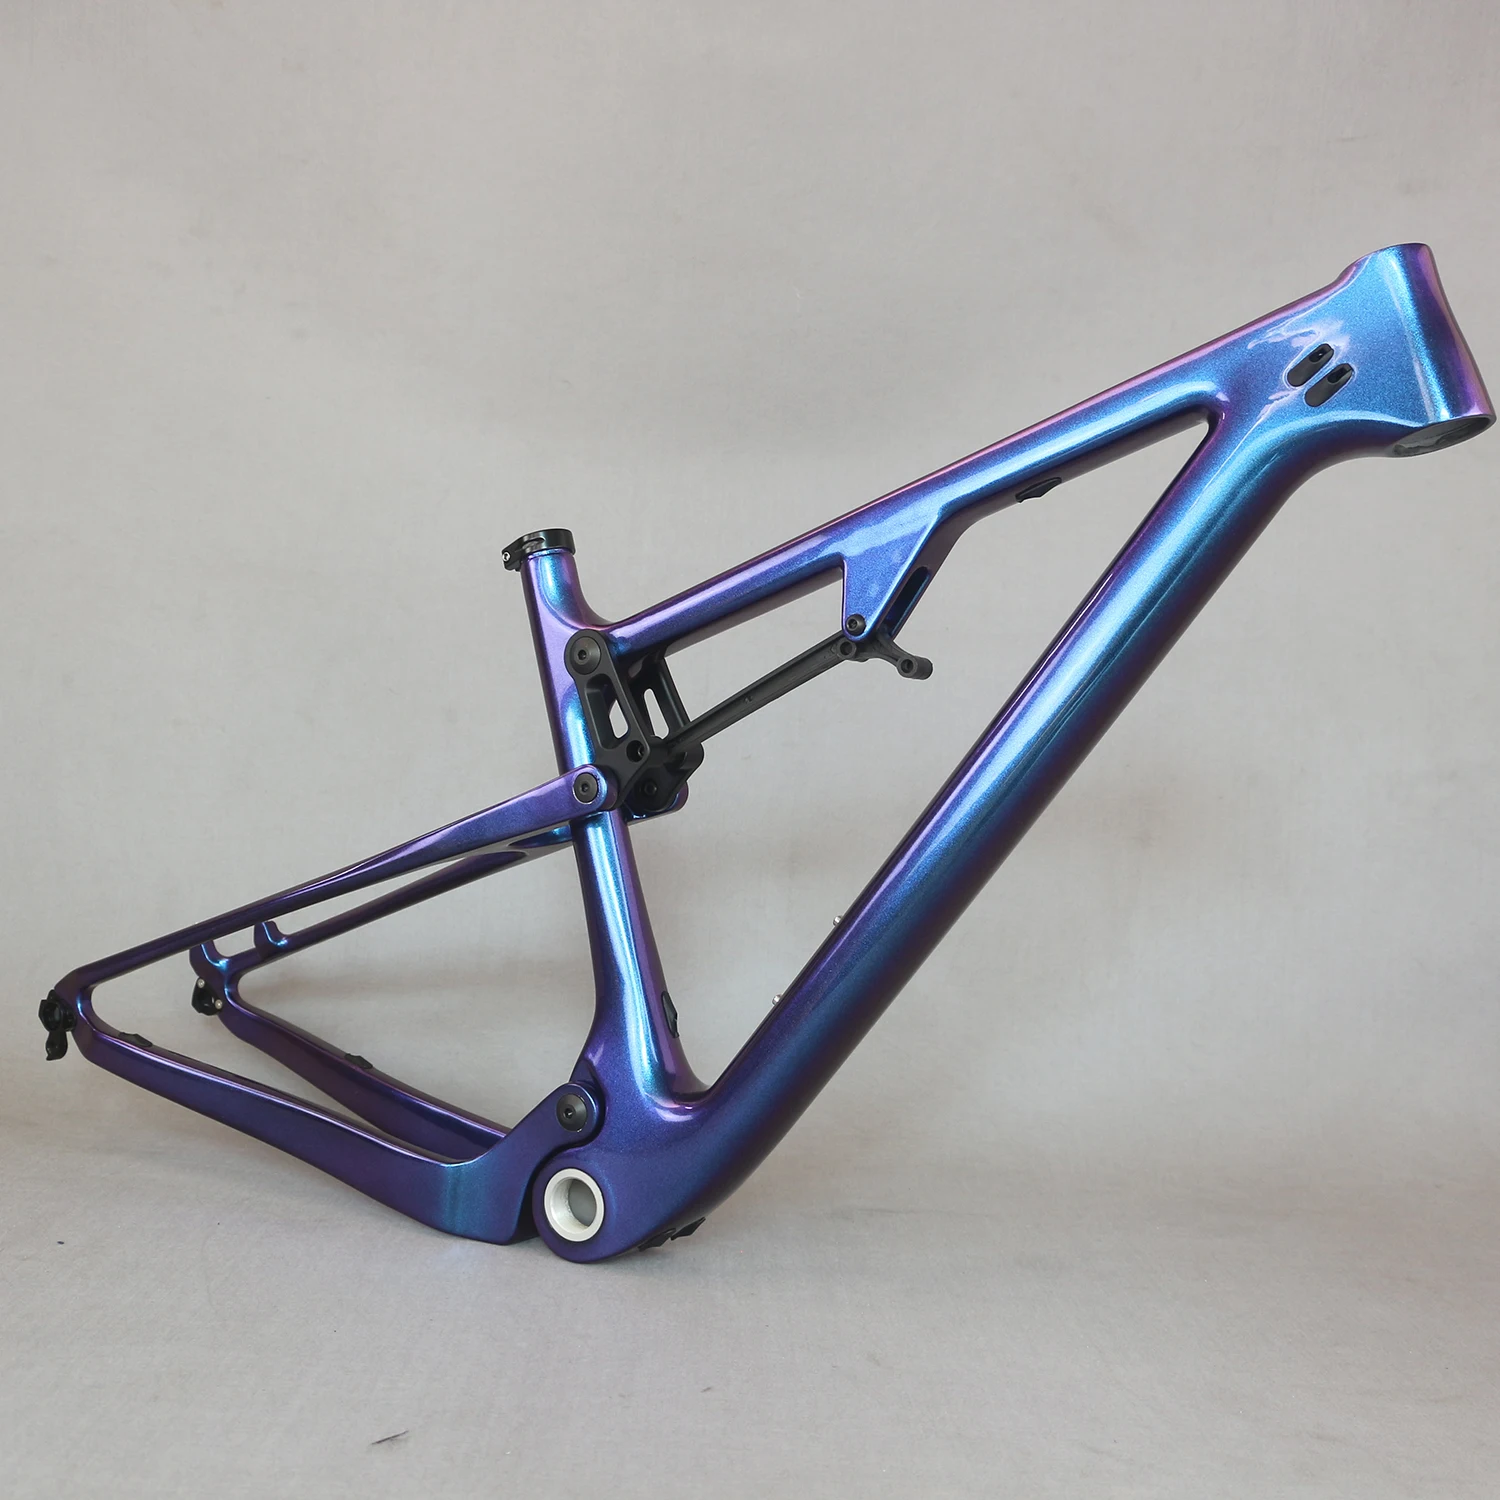 Bike parts new 29 Full Suspension MTB Bicycle Carbon frame 29er plus boosted suspension frame 148*12 bicycleframe